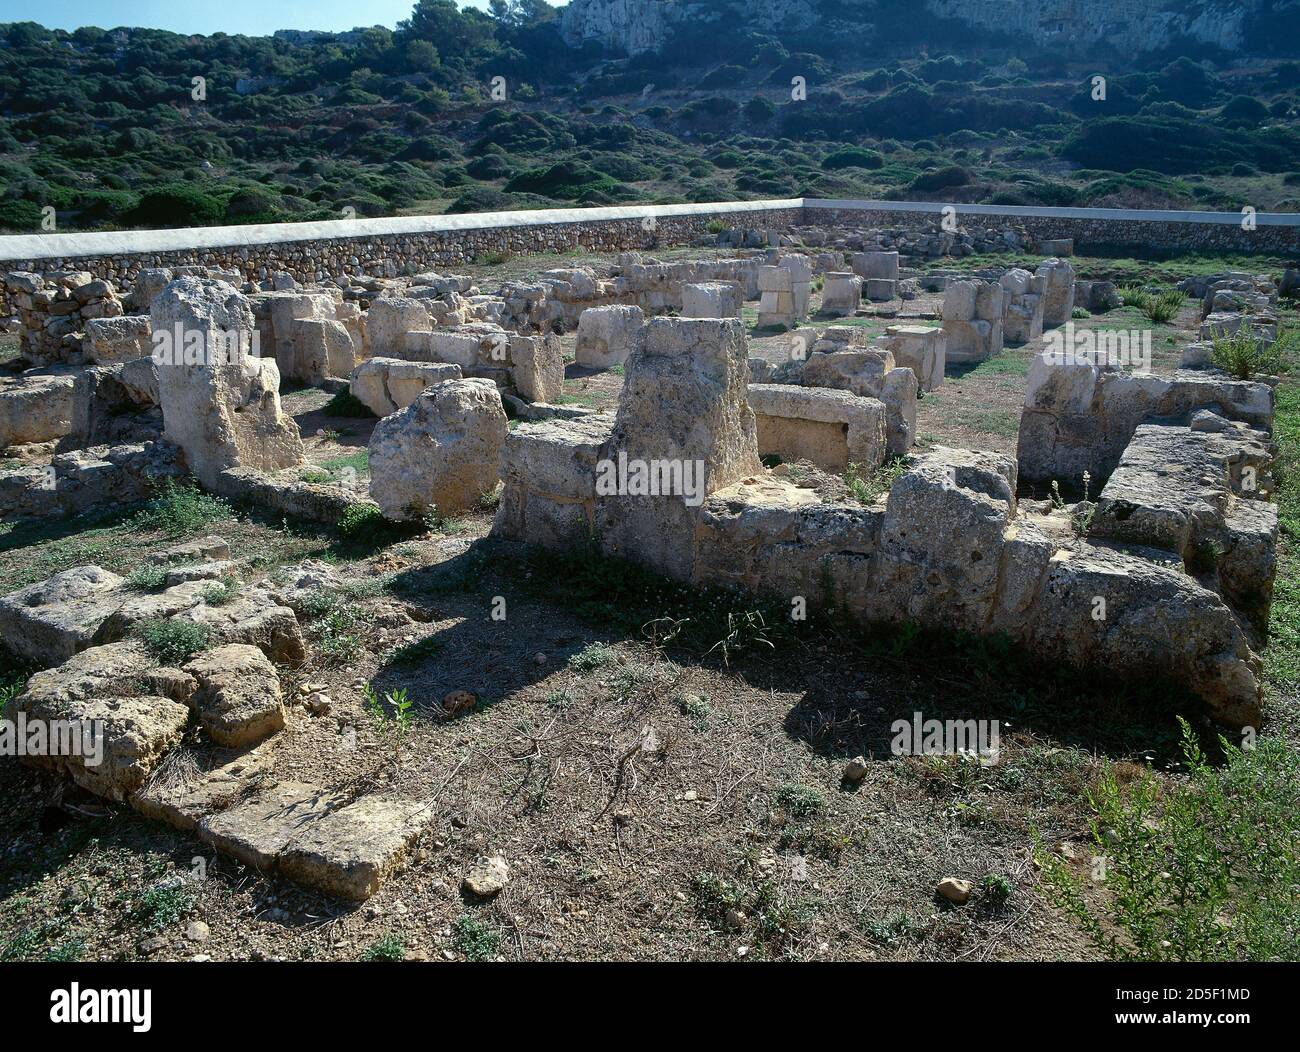 Spain, Balearic Islands, Menorca, Alaior. Paleochristian Basilica of Son Bou. Chronologically located between the 5th and 6th century. Archaeological remains. Stock Photo